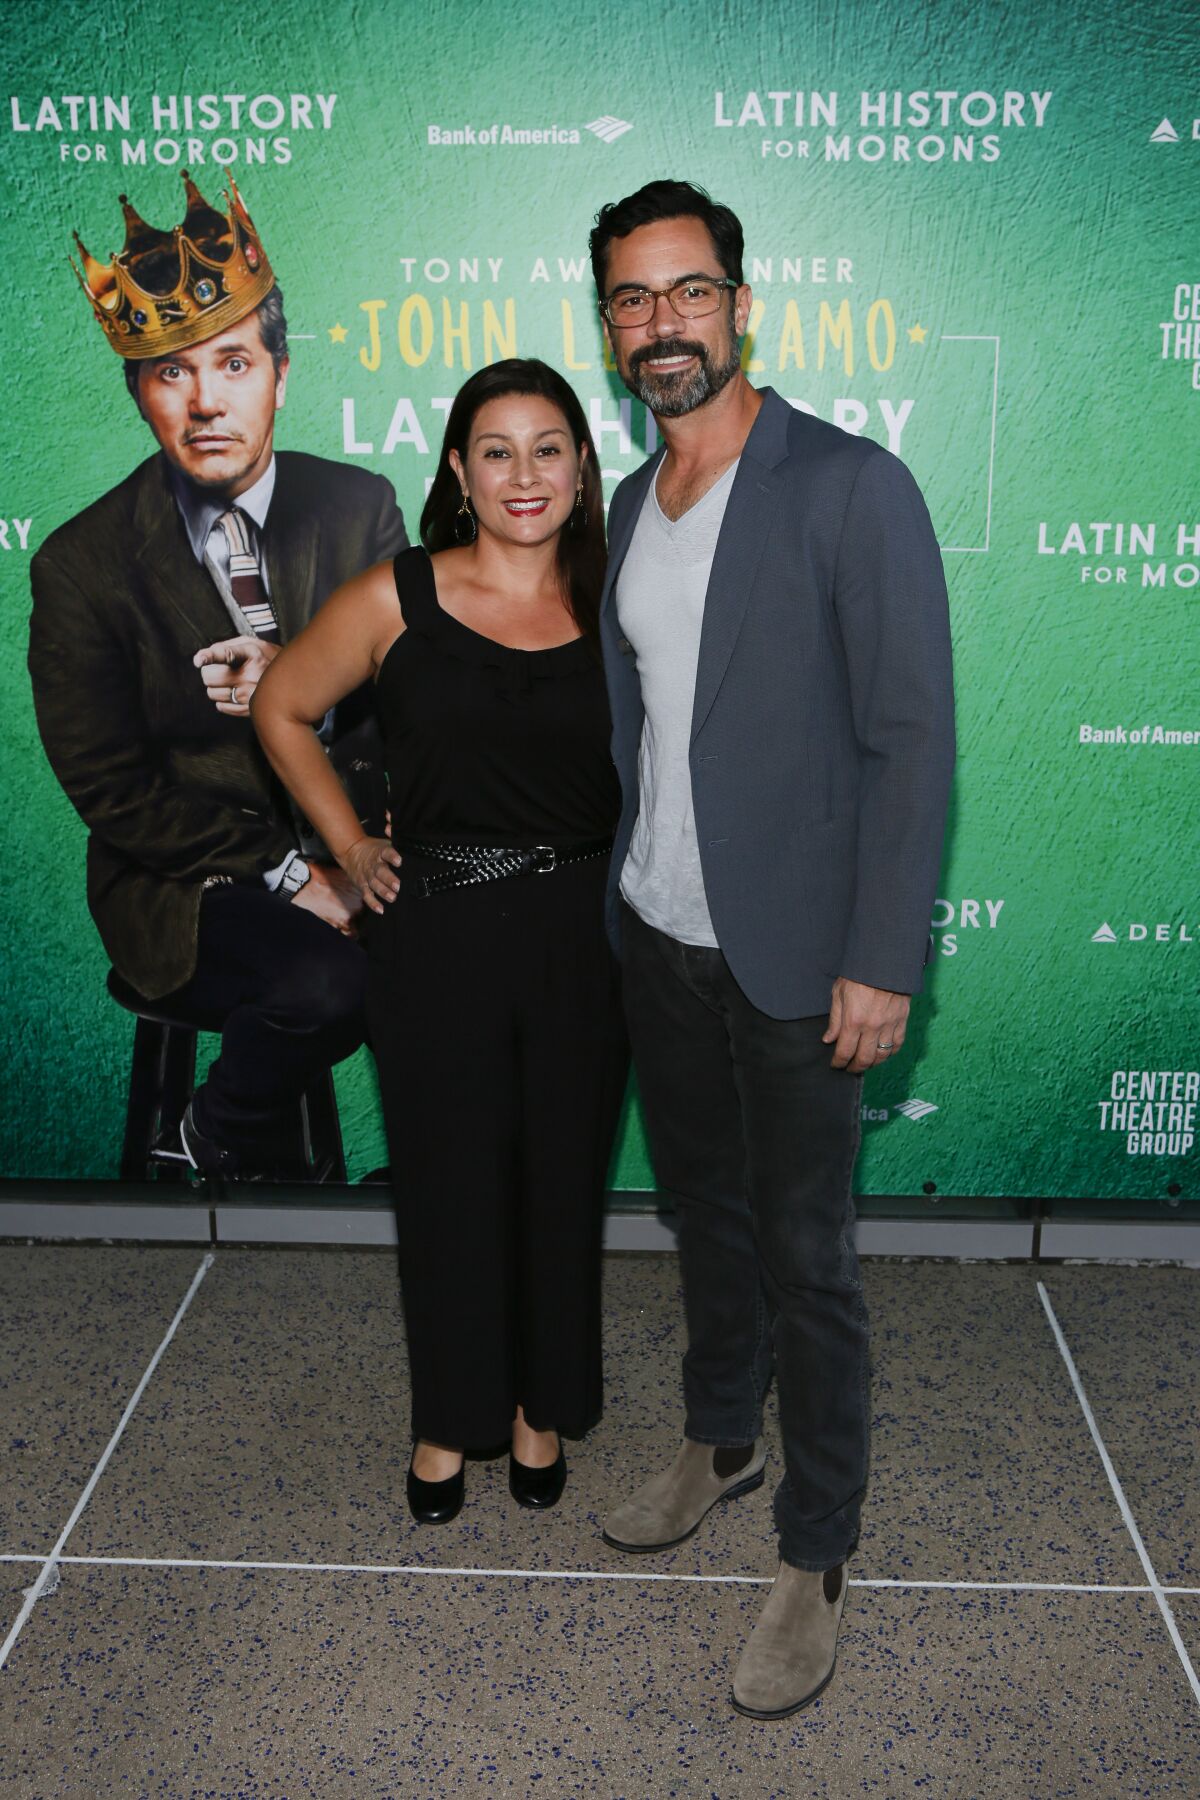  Lily Pino, left, and Danny Pino at opening night of “Latin History for Morons” in Los Angeles.